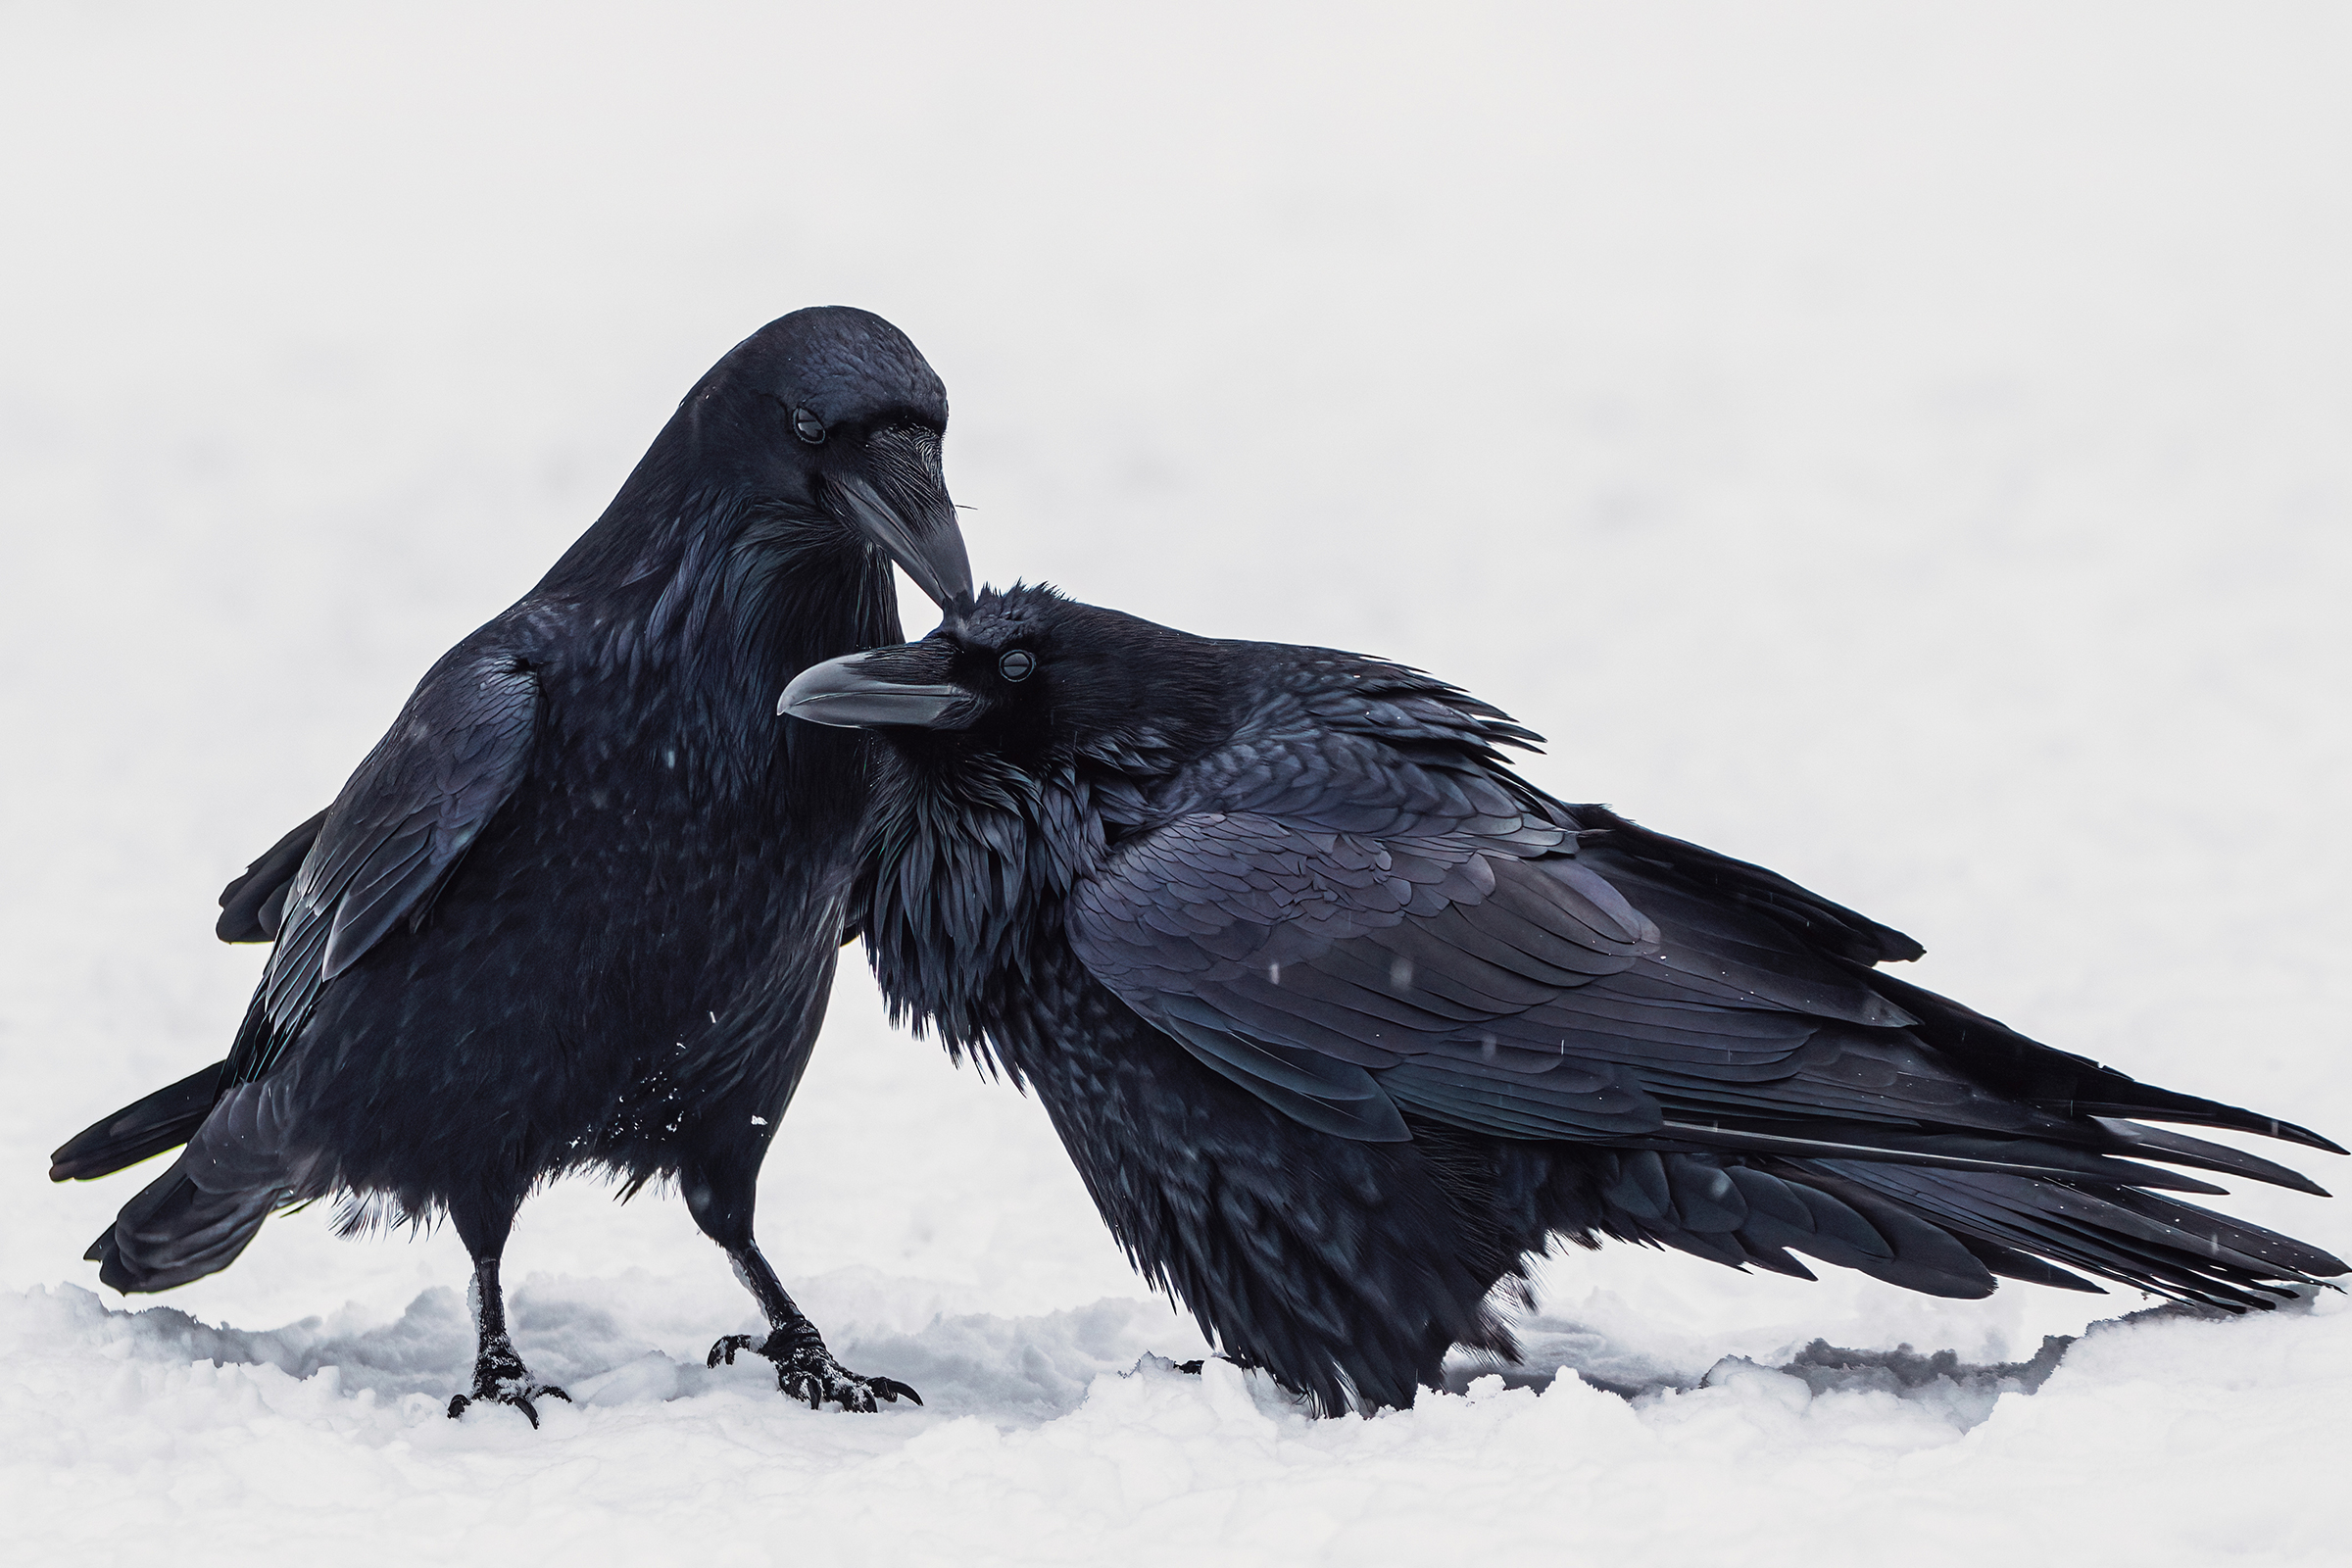 The year’s best bird photography highlights the humor, beauty, and fragility of avian life